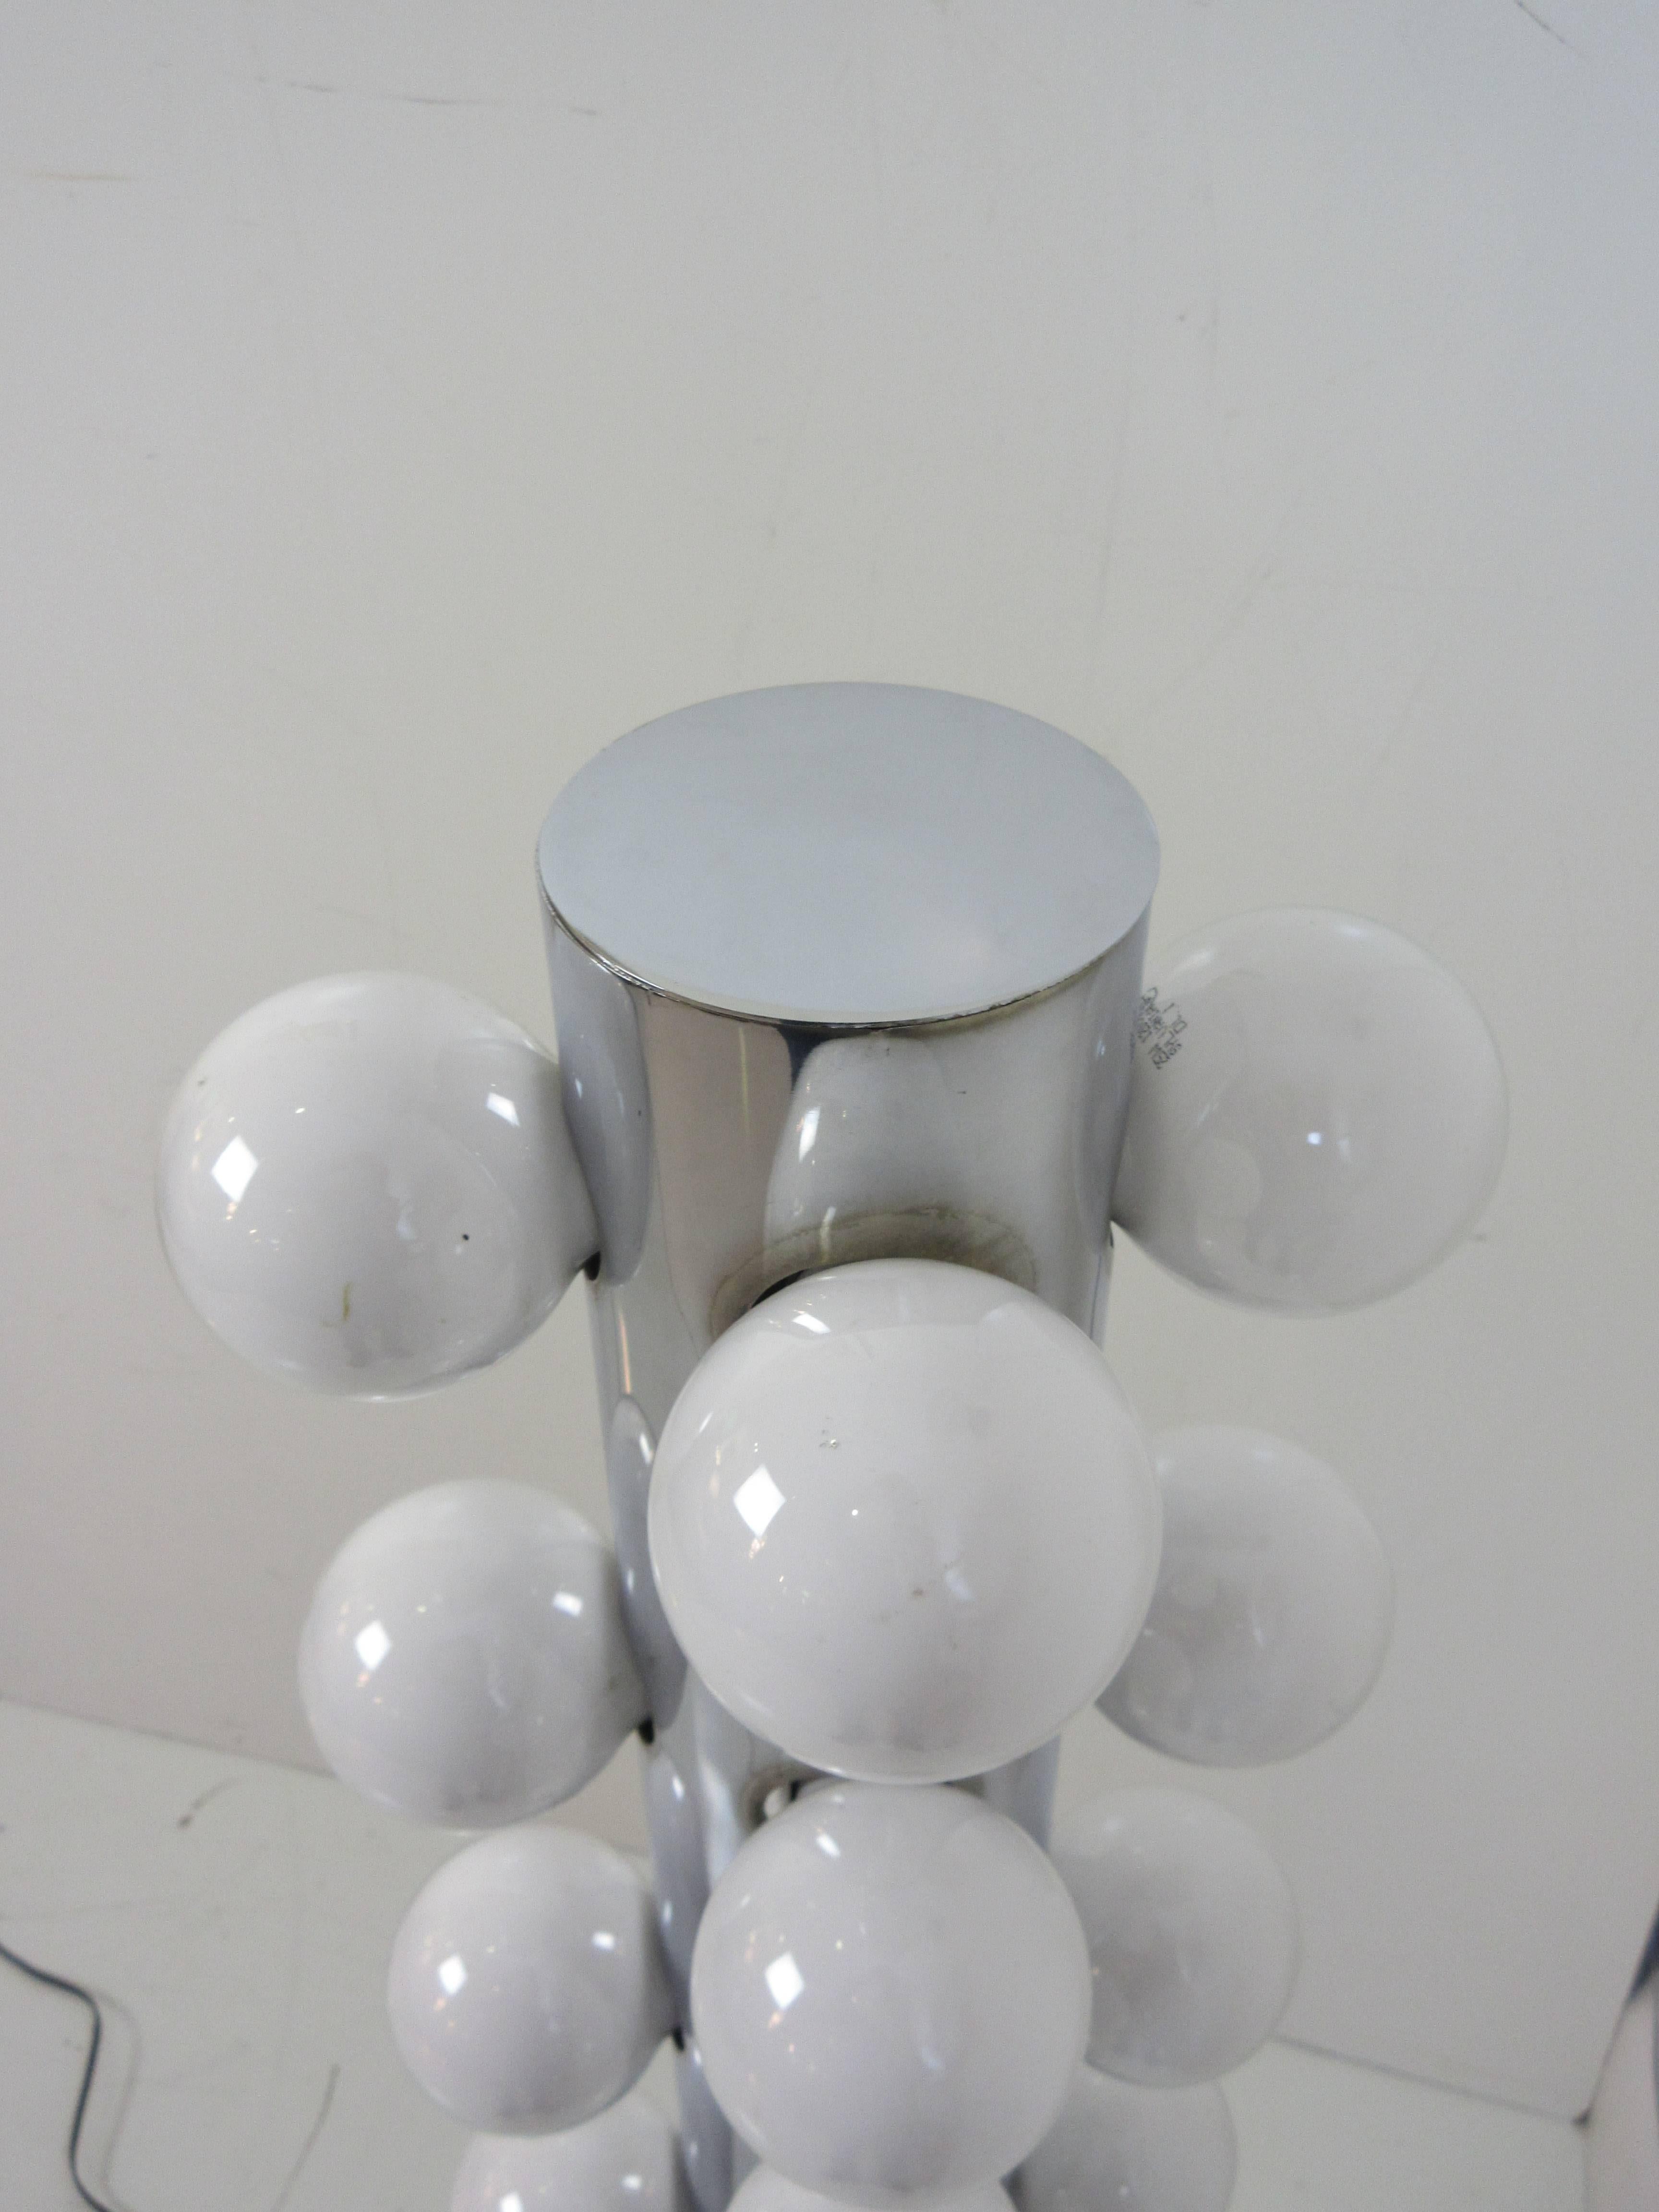 Robert Sonneman floor lamp in chrome with 16 vanity light bulbs on dimmer for infinite possible lighting intensities. This lamp was part of a series of lamps with matching table lamps. Tall cylinder on disk base rises four feet with bulbs on the top